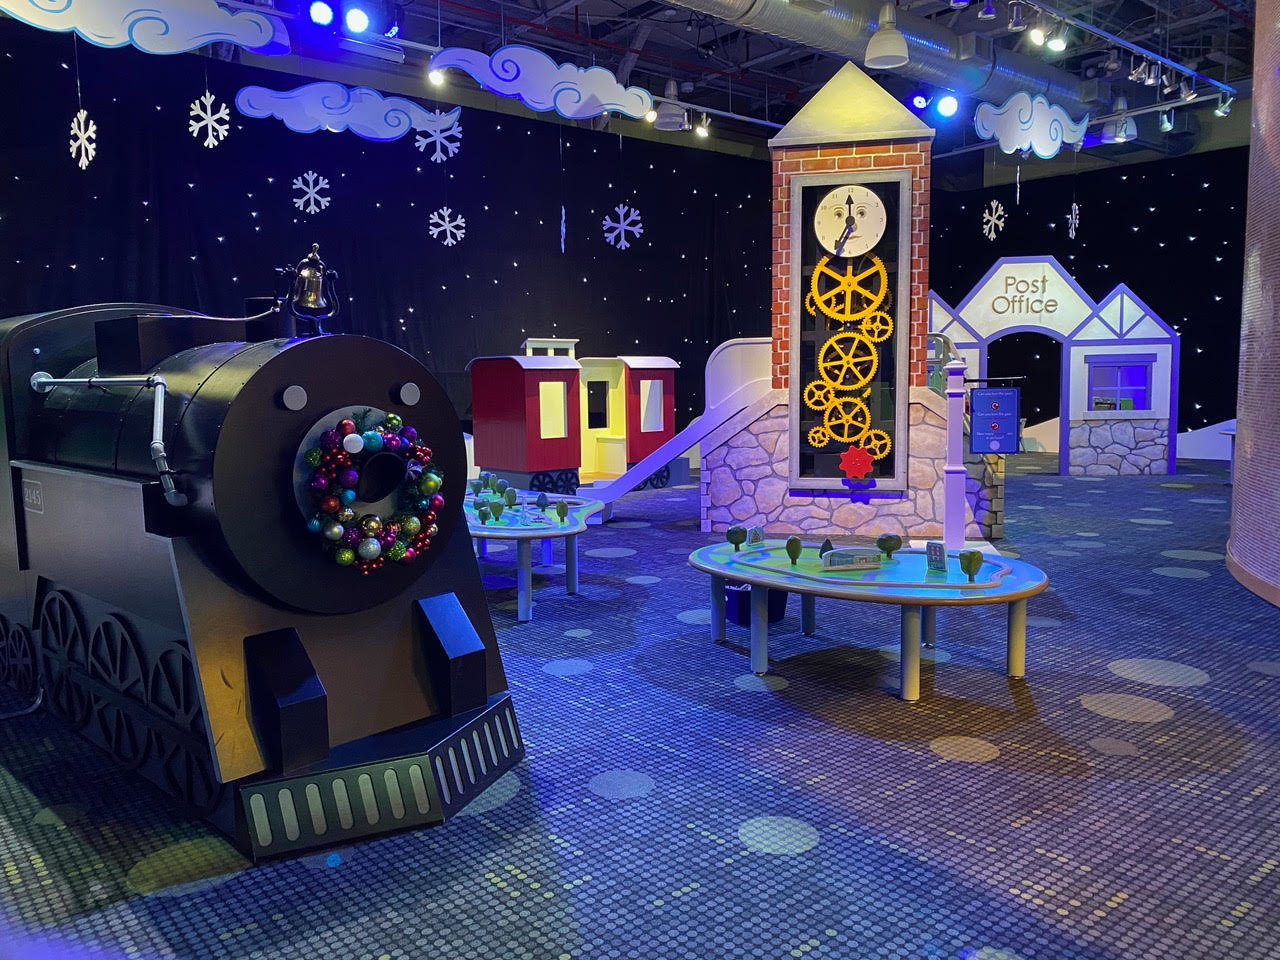 The train and clock tower add to the fun of the North Pole exhibit.